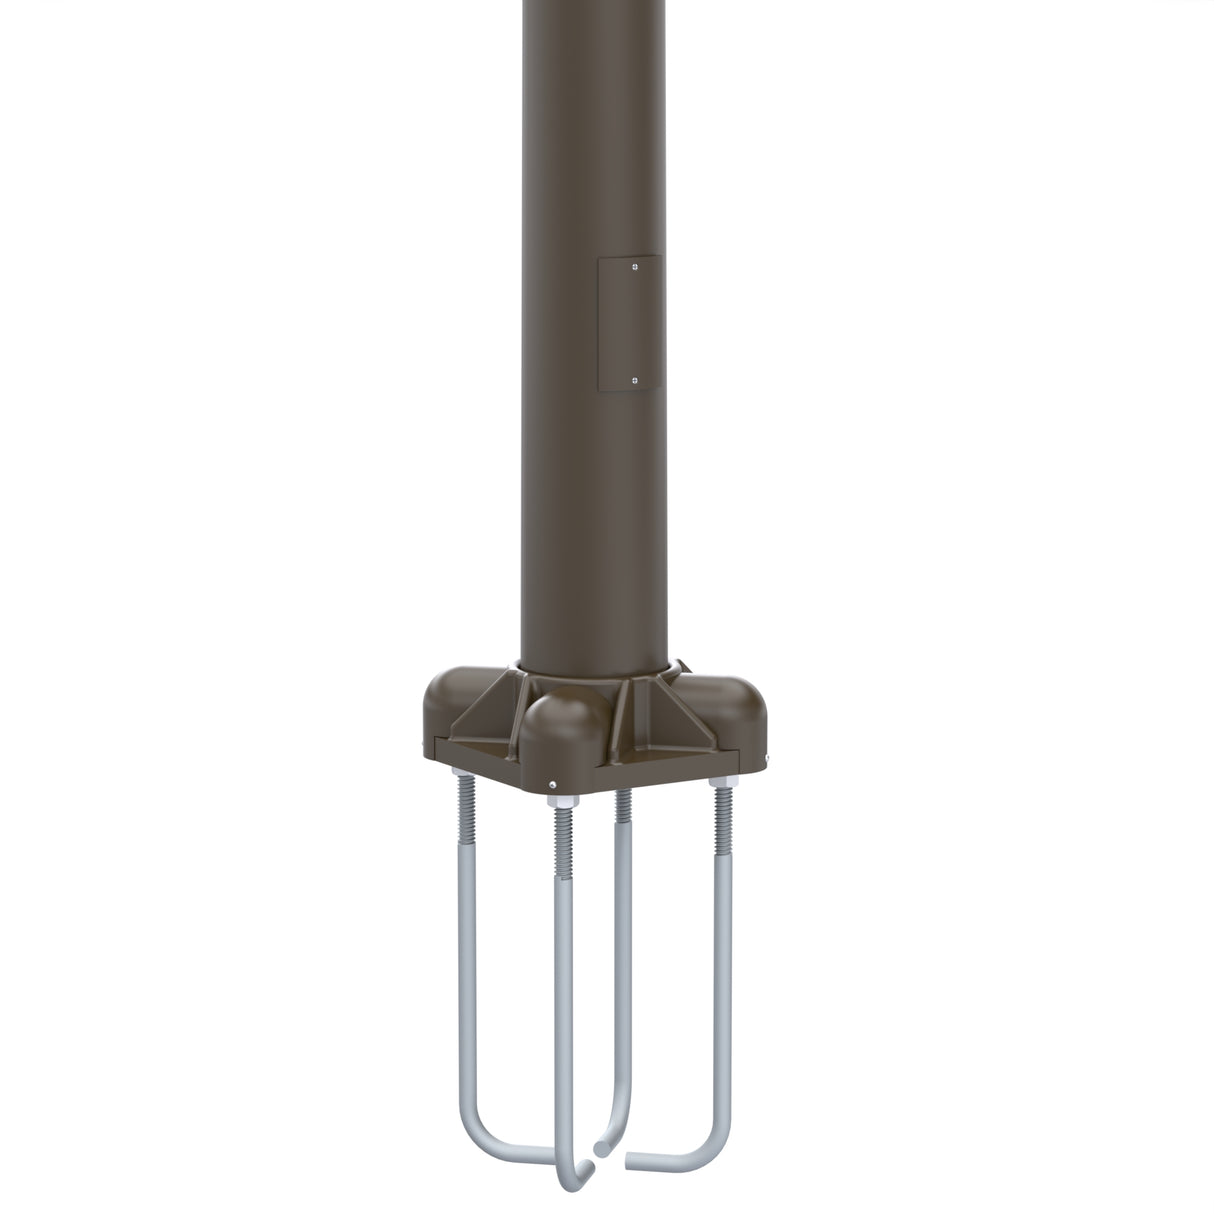 40' Tall x 8.0" Base OD x 4.5" Top OD x 0.250" Thick, Round Tapered Aluminum, Anchor Base Light Pole with 8' Davit Arm